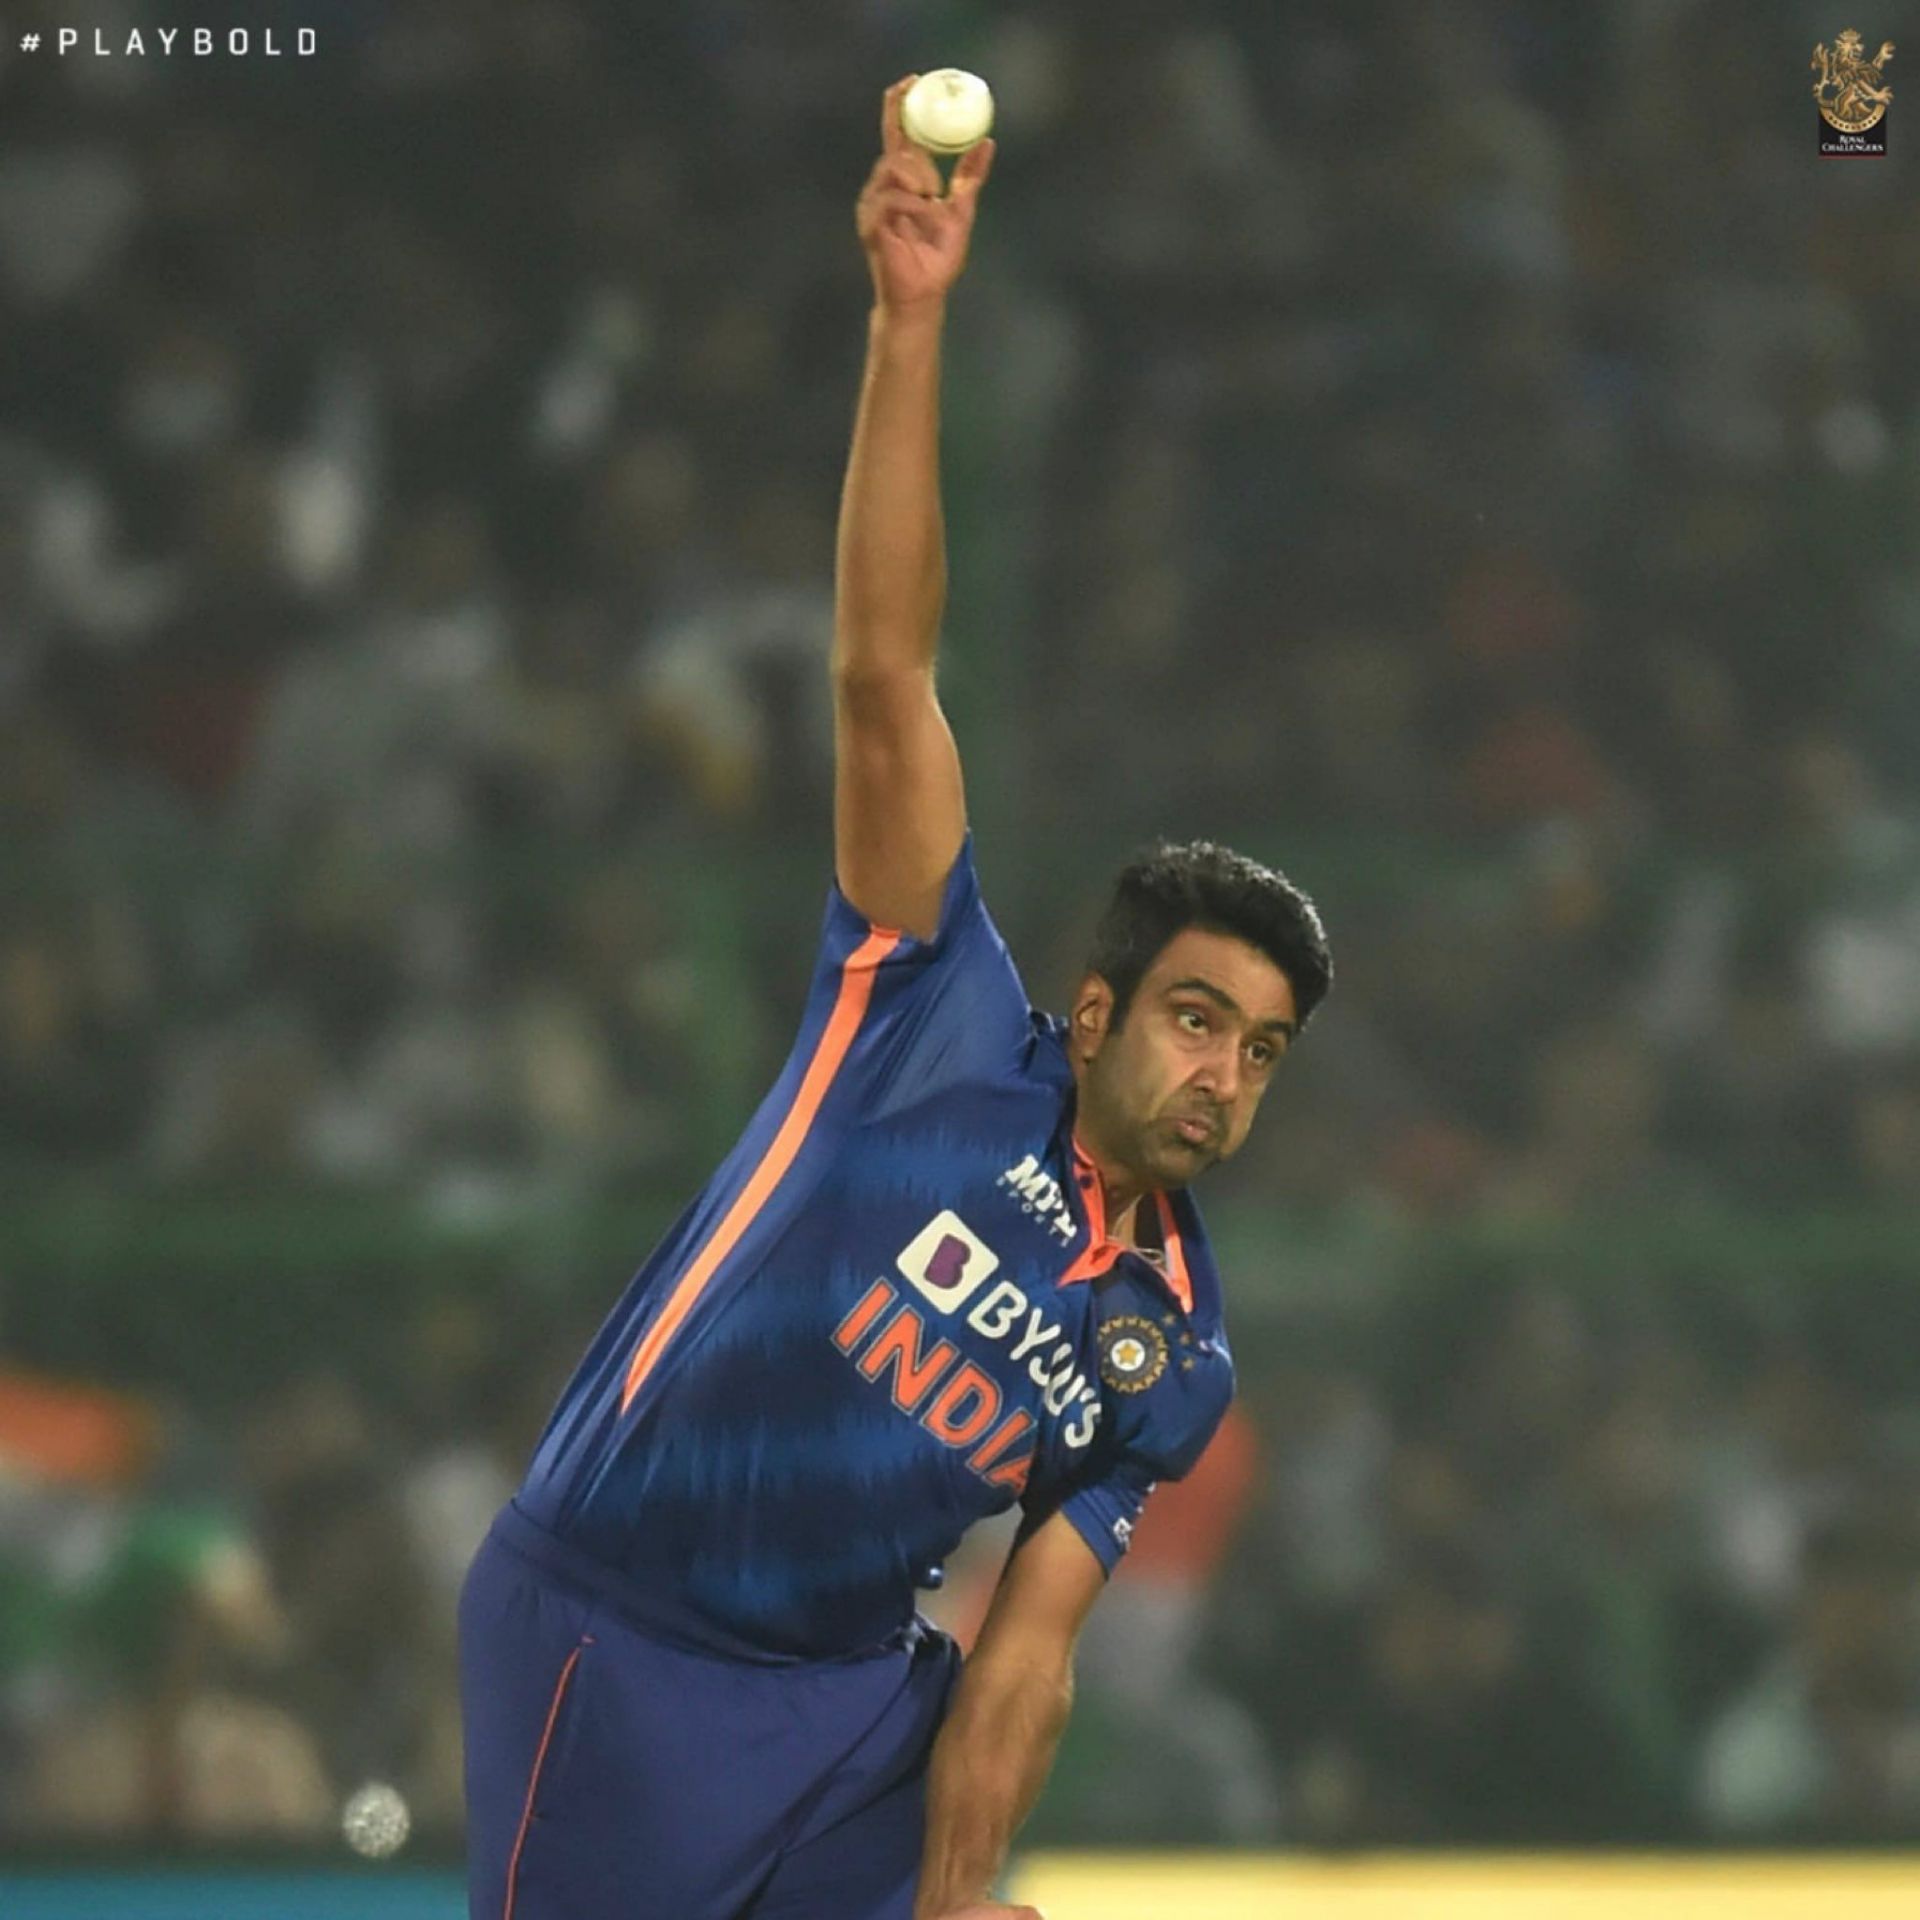 Ravichandran Ashwin was at his absolute best against New Zealand in Jaipur [Image- Twitter].